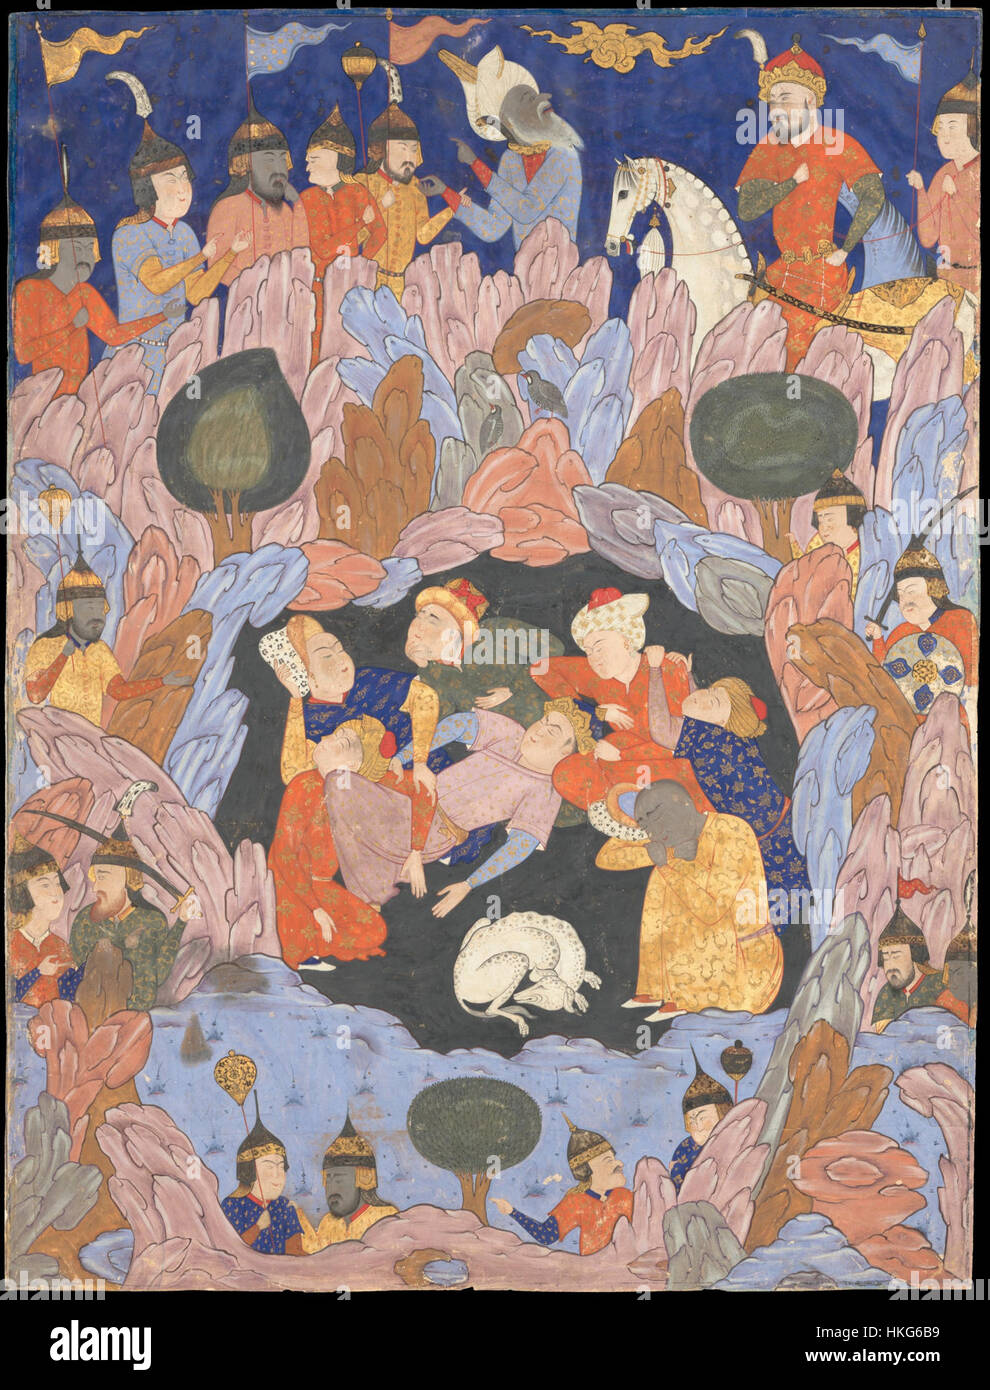 Abd al Aziz and Aqa Mirek (attr.),The Seven Sleepers of Ephesus Discovered by Alexander the Great, Folio from a Falnama (Book of Omens) 1550s Qazvin, Metmuseum Stock Photo